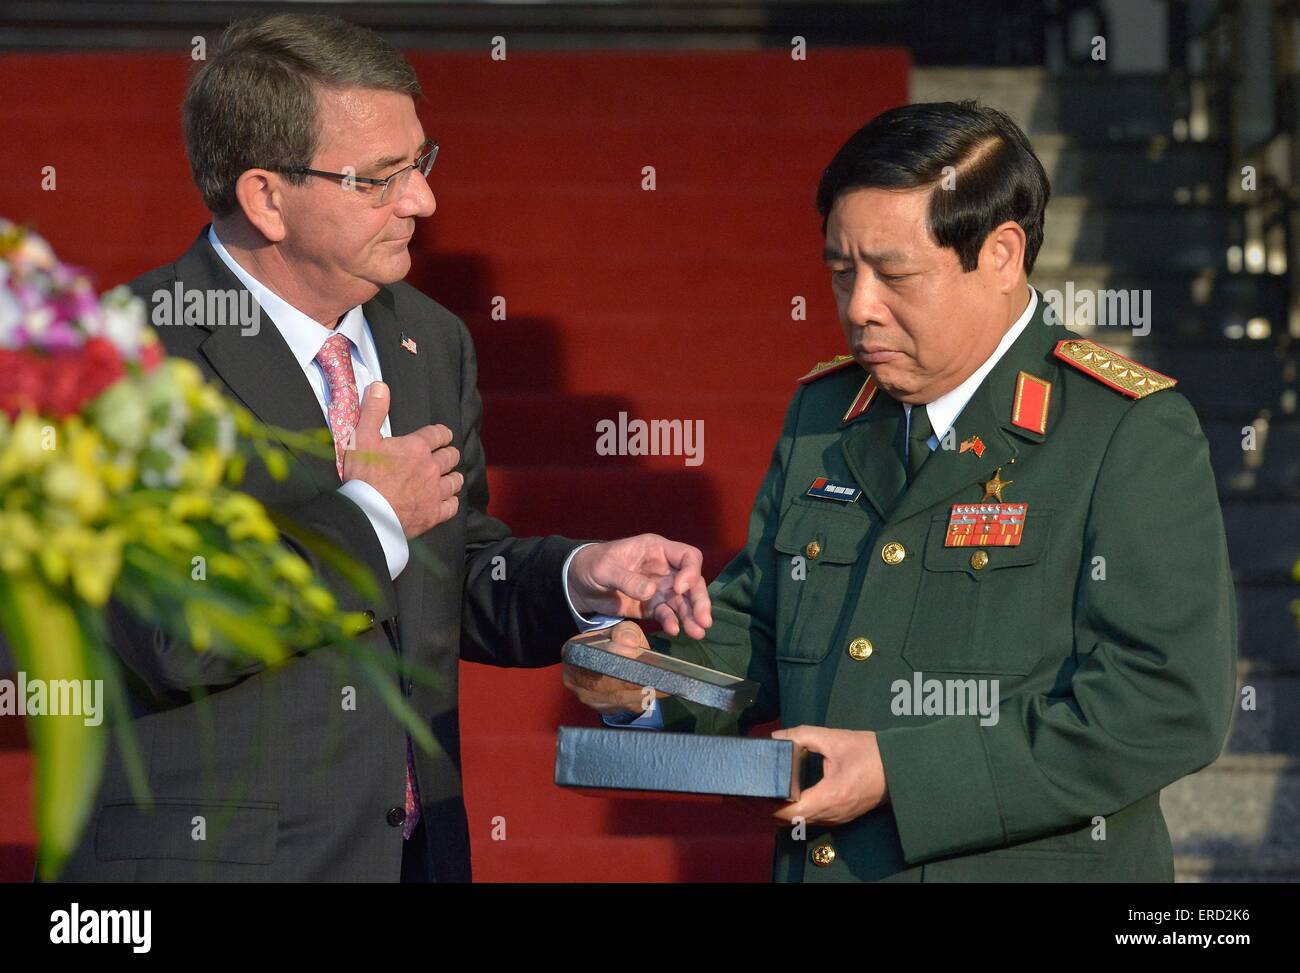 US Secretary of Defense Ashton Carter gifts repatriated war artifacts to Vietnamese Minister of Defense General Phung Quang Thanh at the Vietnamese Ministry of Defense June 1, 2015 in Hanoi, Vietnam. Stock Photo